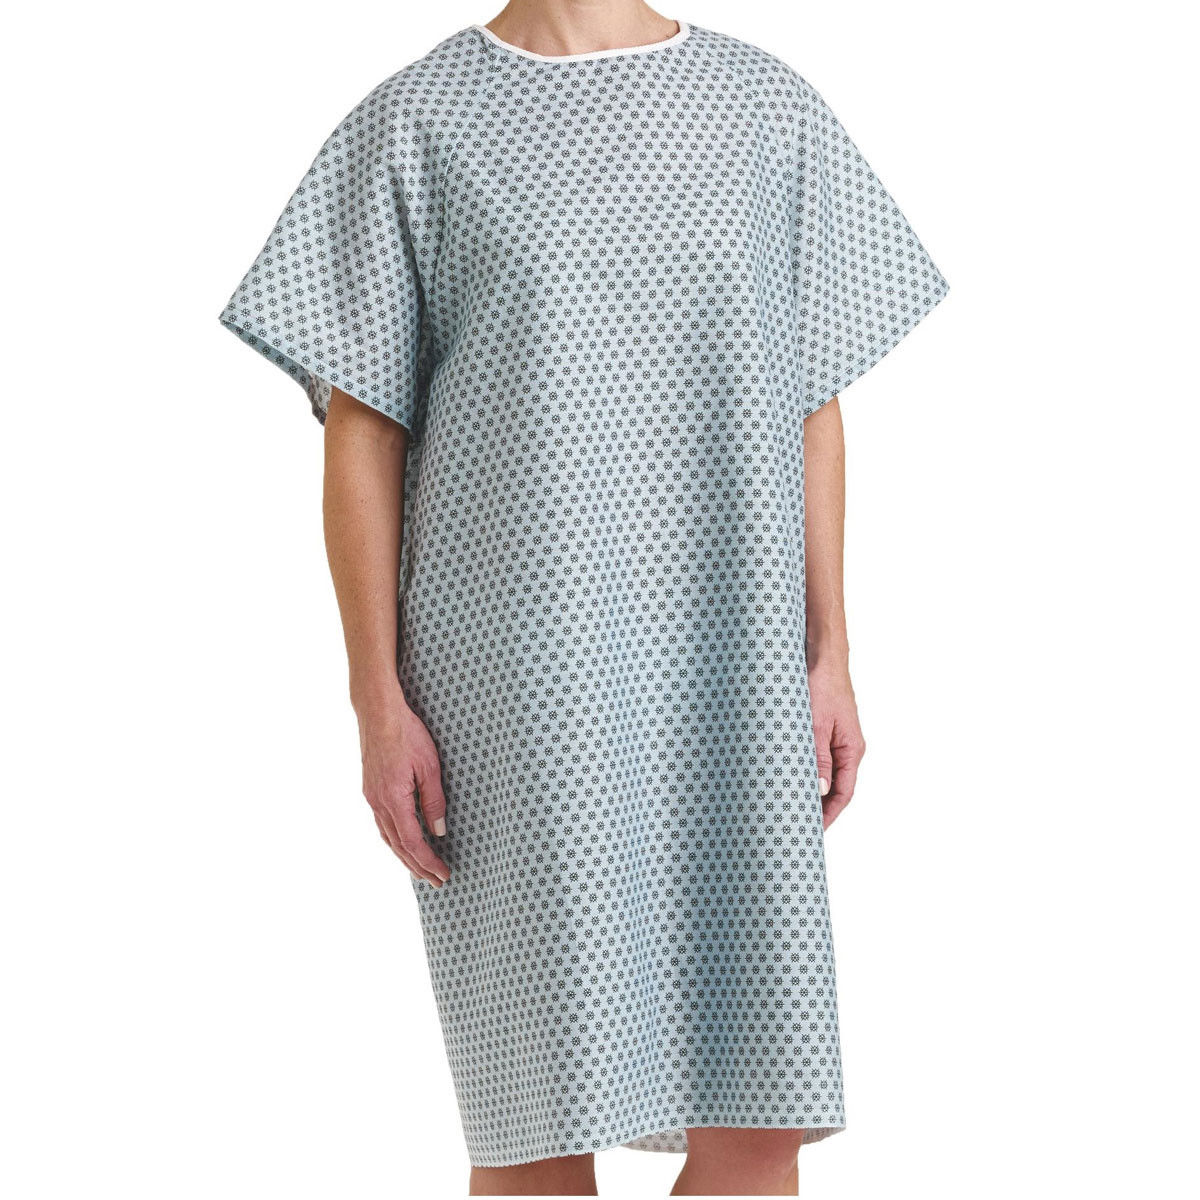 Where are the closures on this hospital gown?